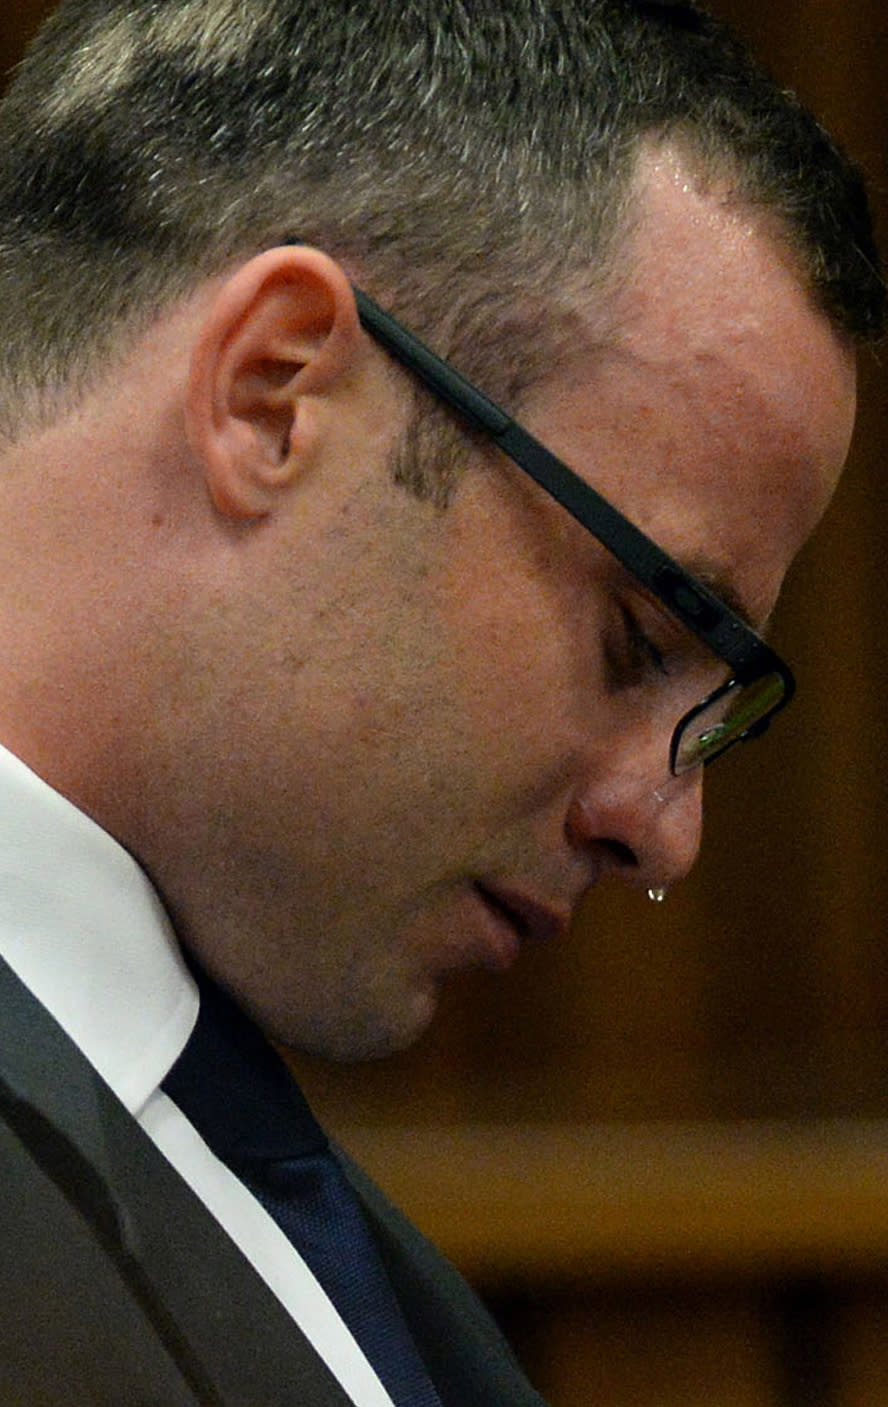 FILE: In this file photo taken Monday, March 24, 2014, Oscar Pistorius, cries in court as he listens to evidence being given in Pretoria, South Africa, in the murder trial for the shooting death of his girlfriend Reeva Steenkamp on Valentines Day 2013. Pistorius is expected to testify soon when the defense begins its case on Friday March 28, 2014, after four weeks of prosecution-led testimony. (AP Photo/Chris Collingridge, Pool, File)